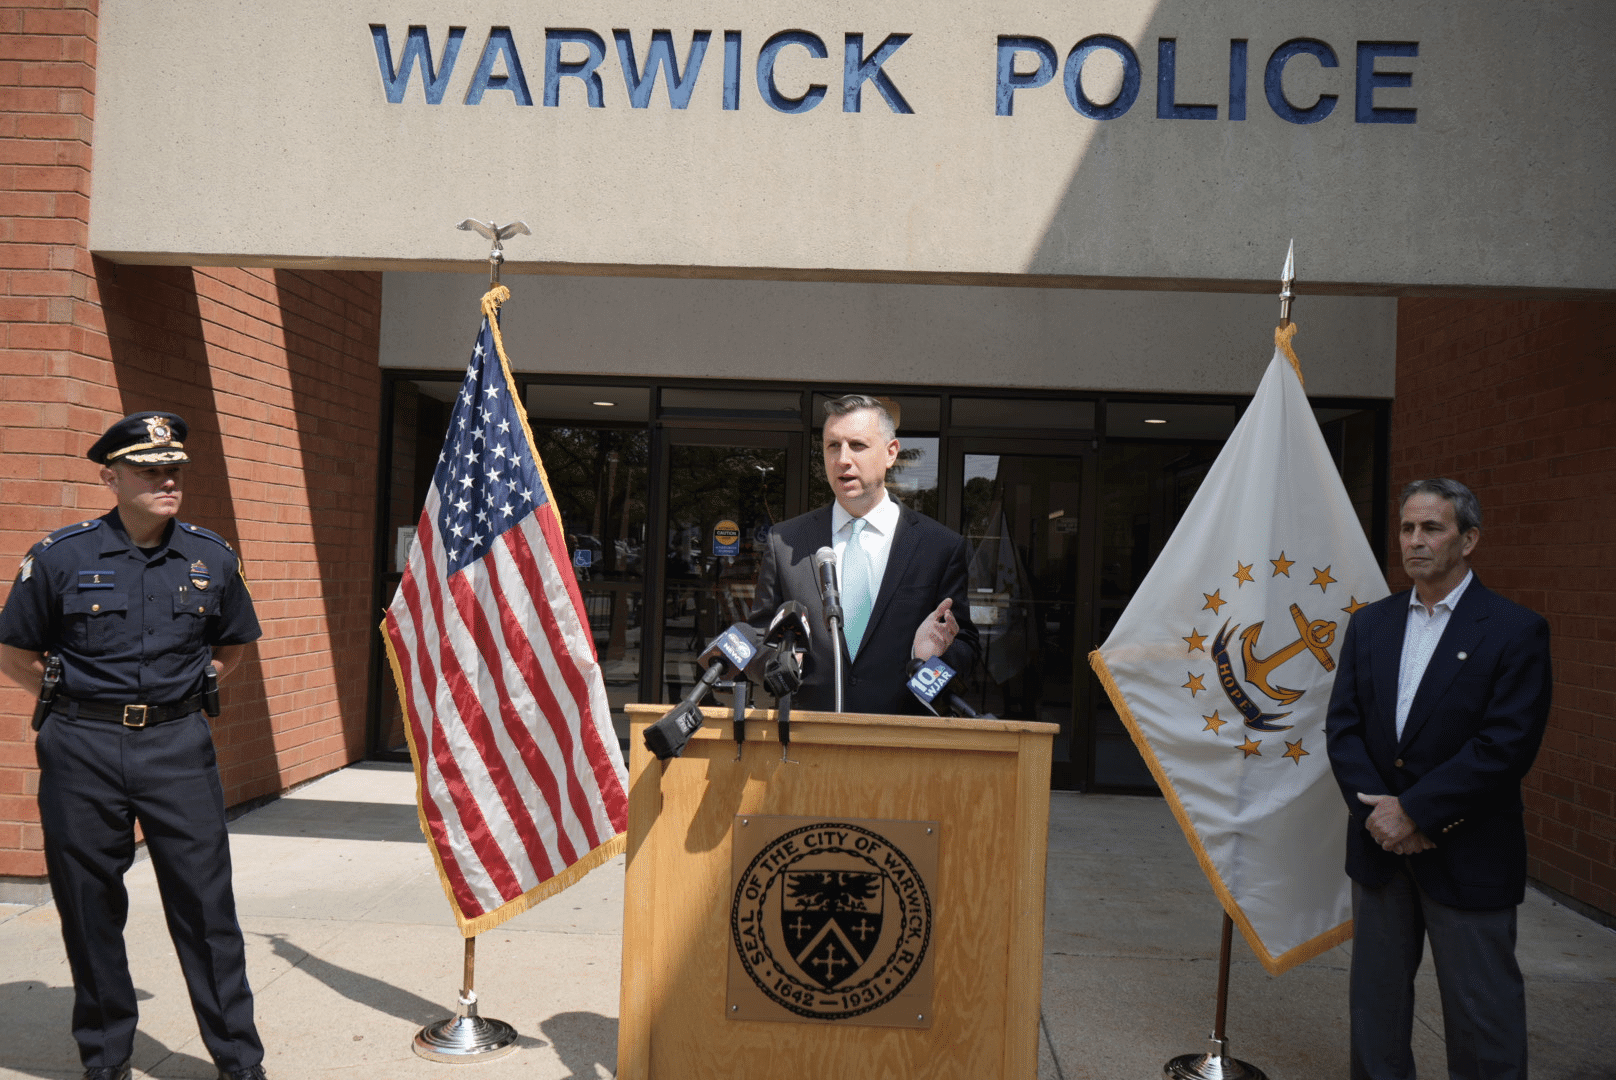 [CREDIT: Congressman Magaziner's office] Congressman Seth Magaziner announced his support for the Invest to Protect Act, which will provide $50M in funding to the nation's local law enforcement agencies.